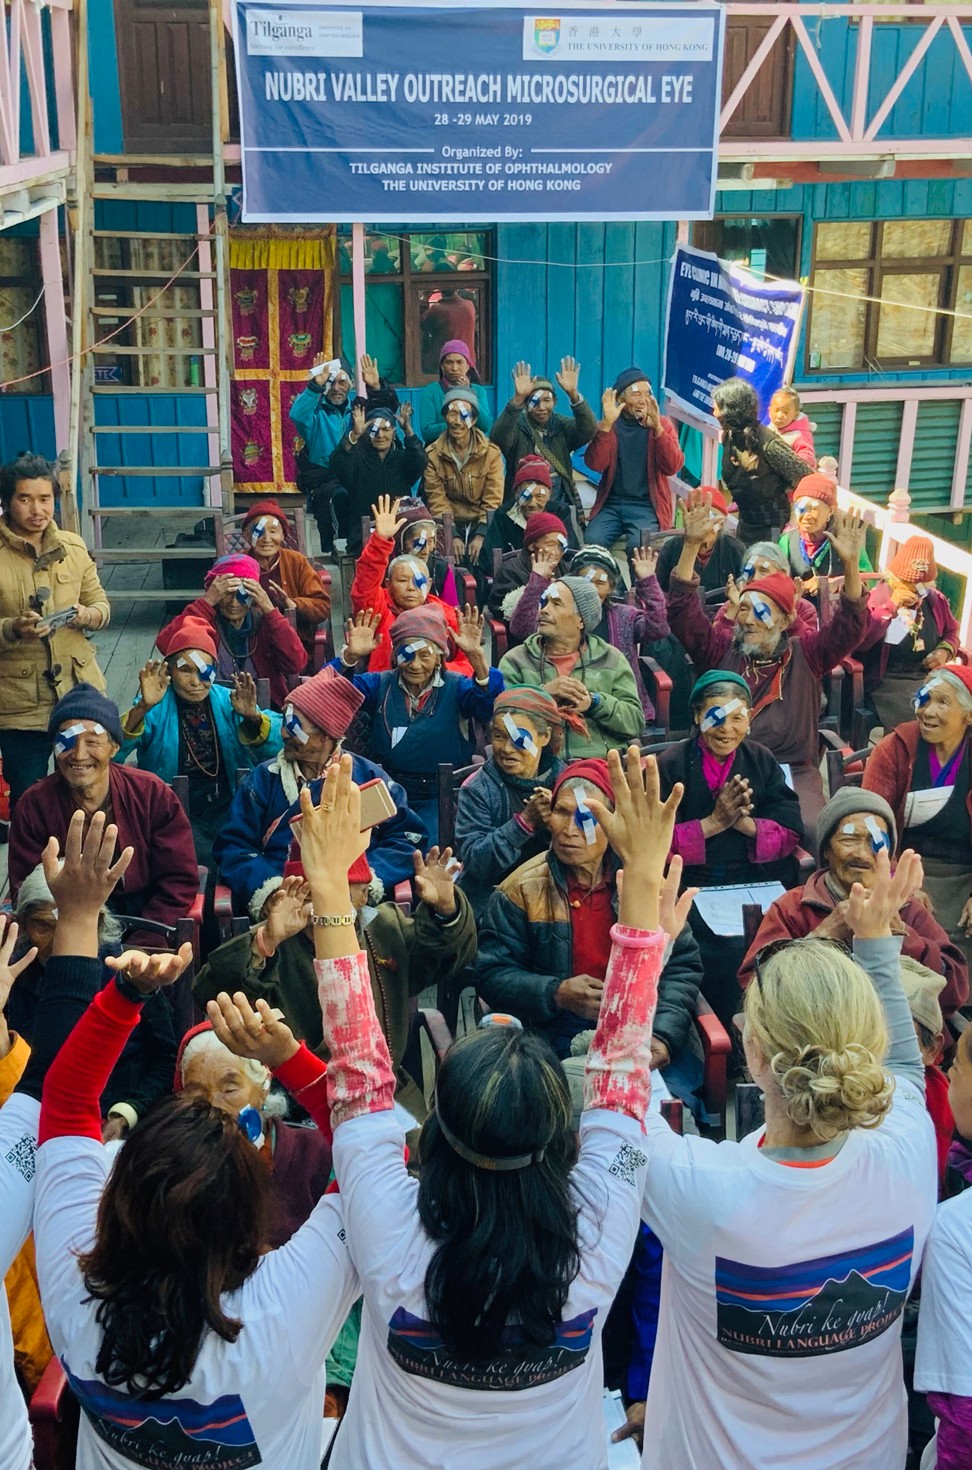 More than 50 people from across the Nubri valley underwent cataract surgery. Photo: HKU